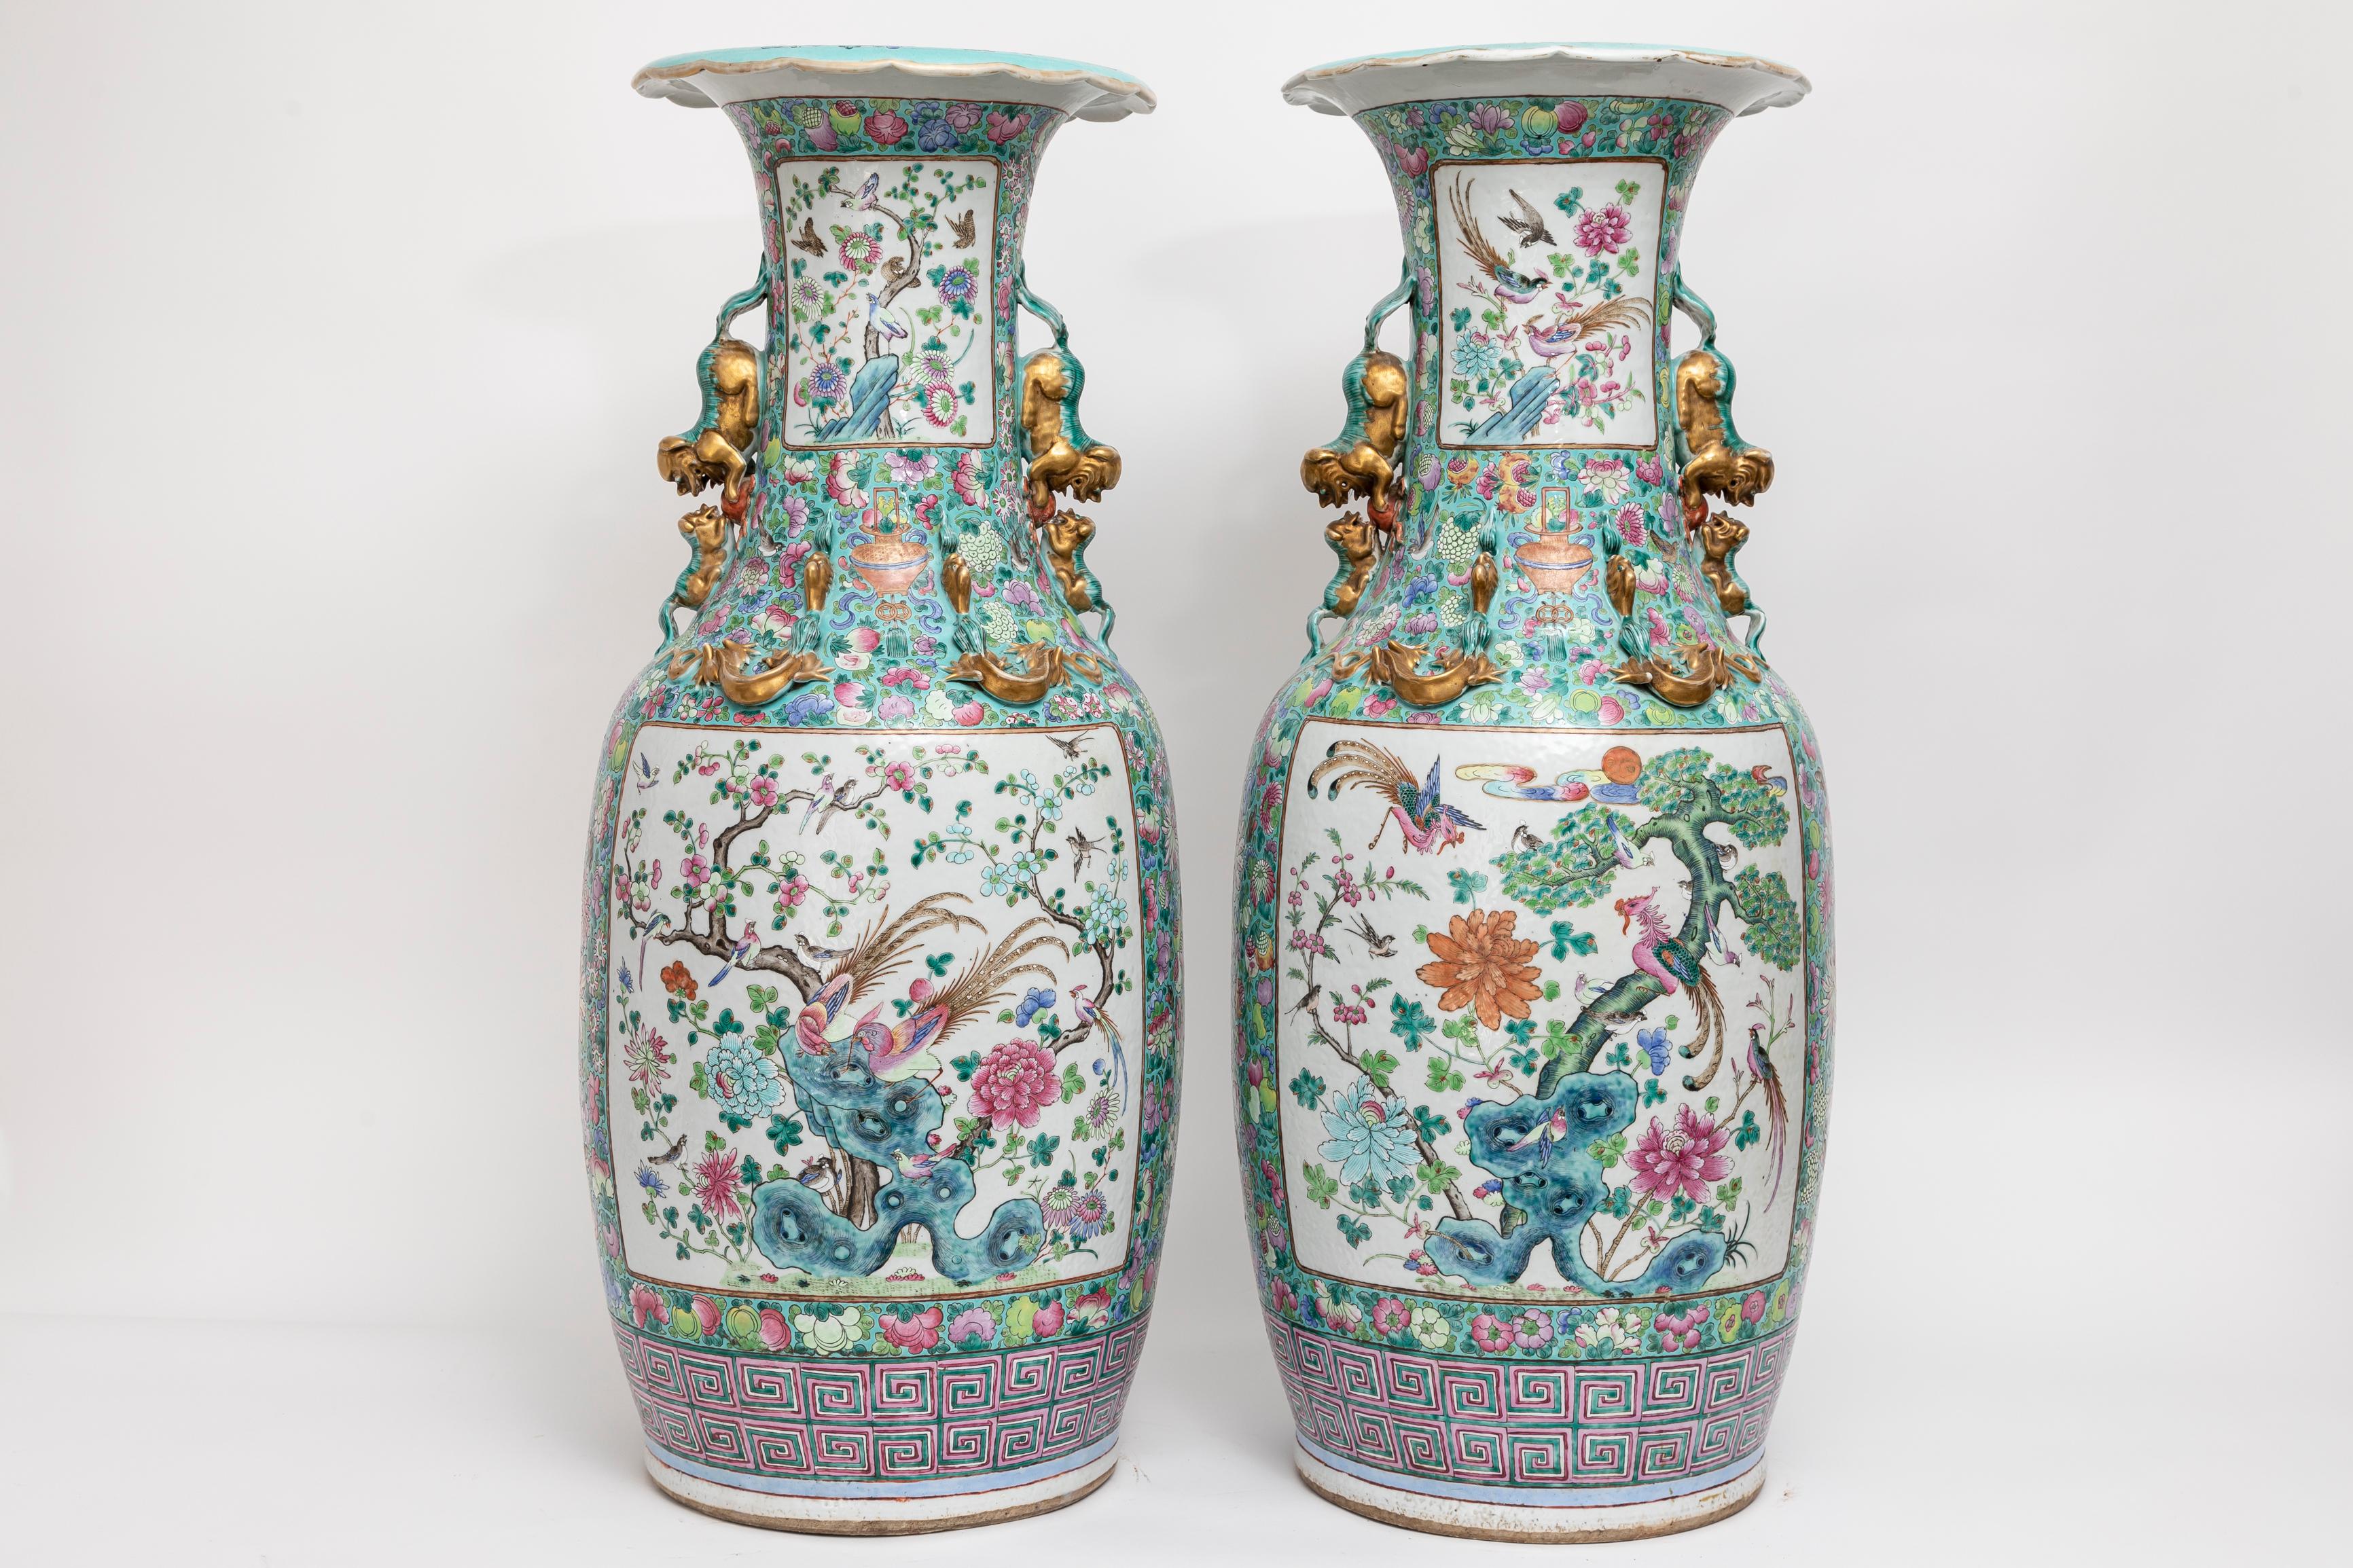 Exquisite Pair of Century Chinese Famille Rose Decorated Porcelain Vases with Striking Foo Dog Handles, 1800s.

Presenting an awe-inspiring and opulent duo of antique Famille Rose Chinese Porcelain vases, adorned with elaborate motifs and